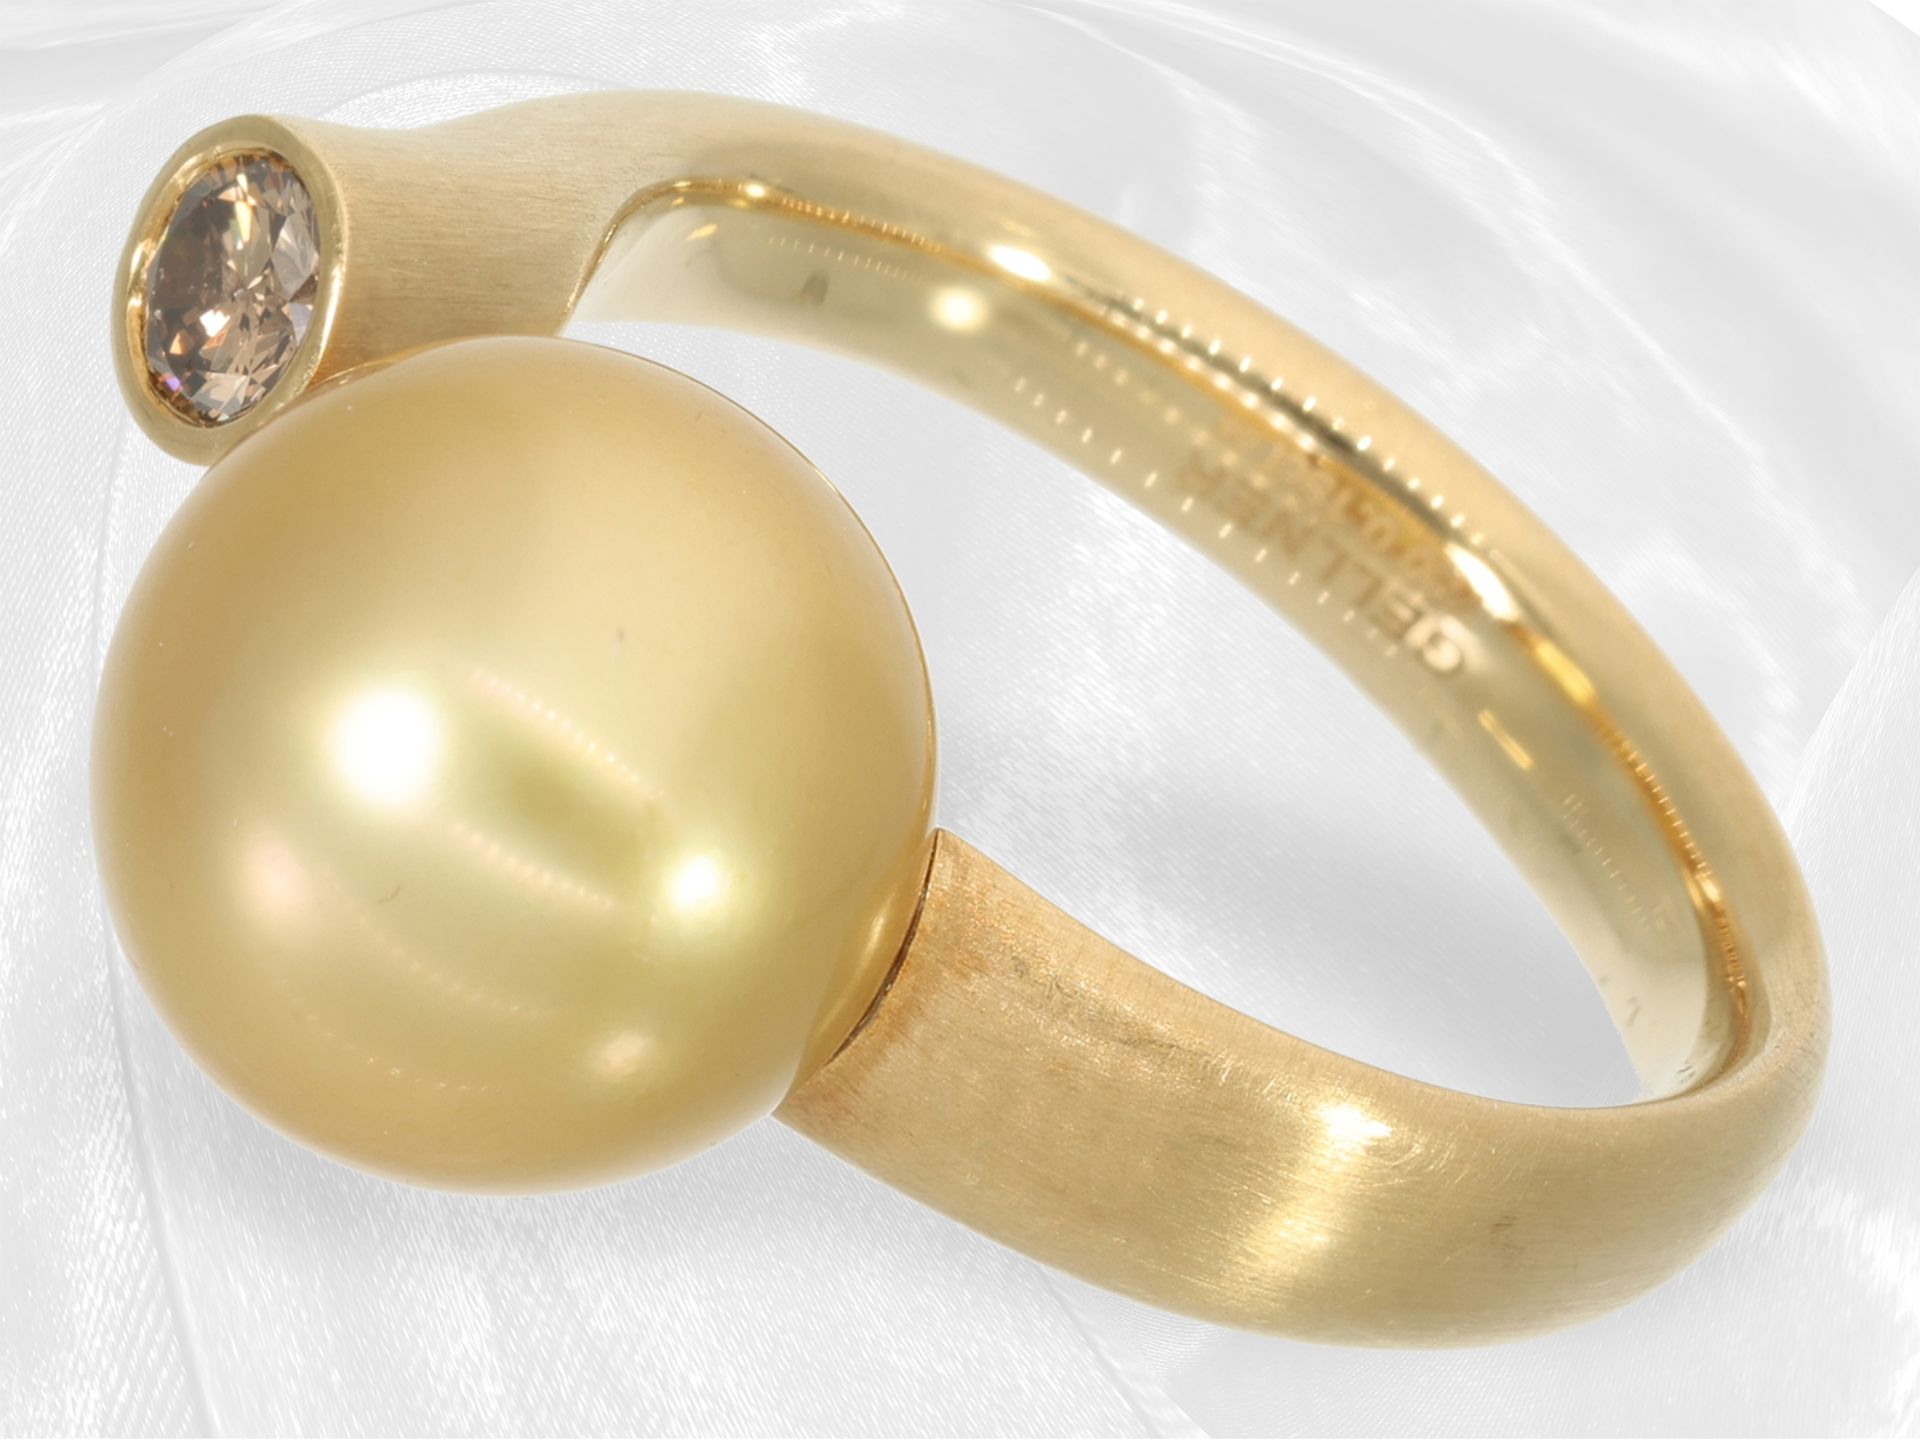 Elaborately crafted, high-quality designer ladies' ring with finest South Sea pearl and fancy diamon - Image 7 of 10